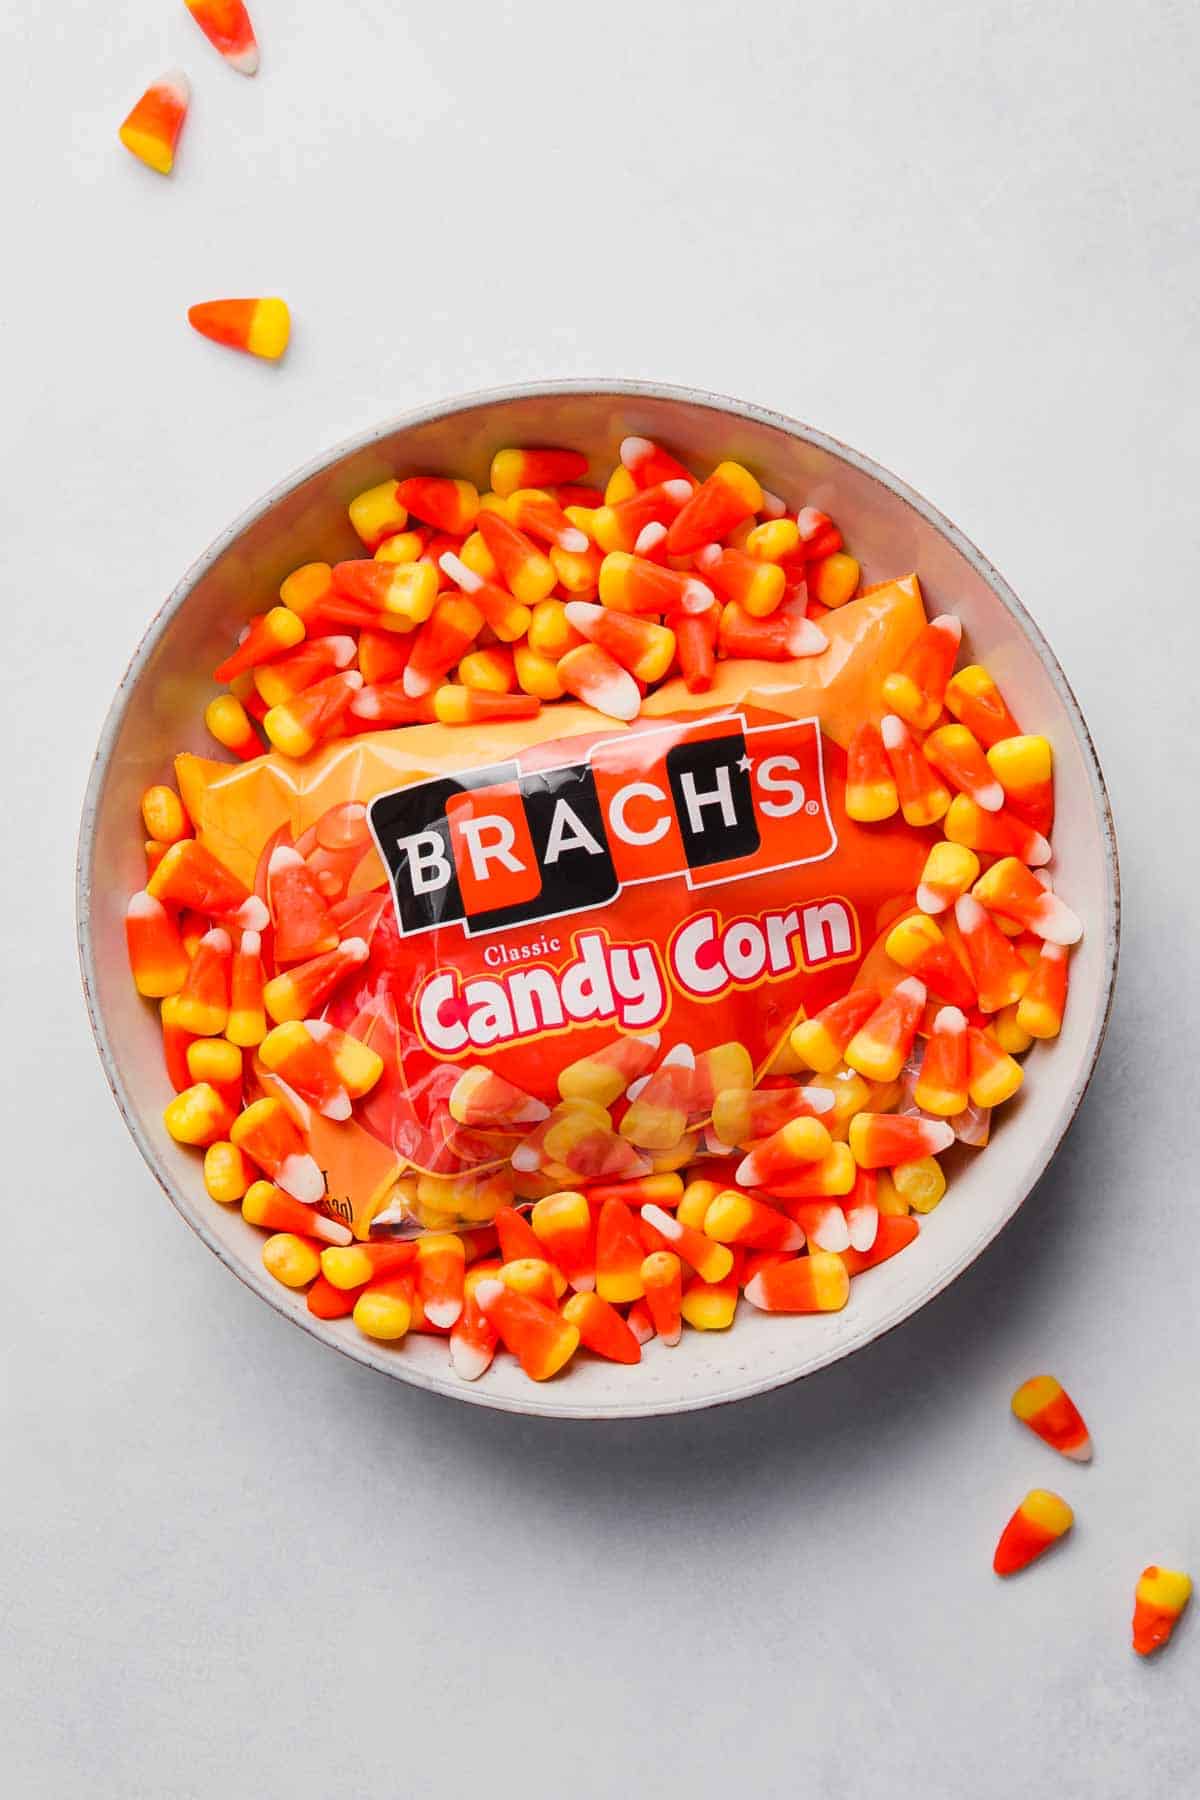 Brach's candy corn in a bowl with a package in the center.